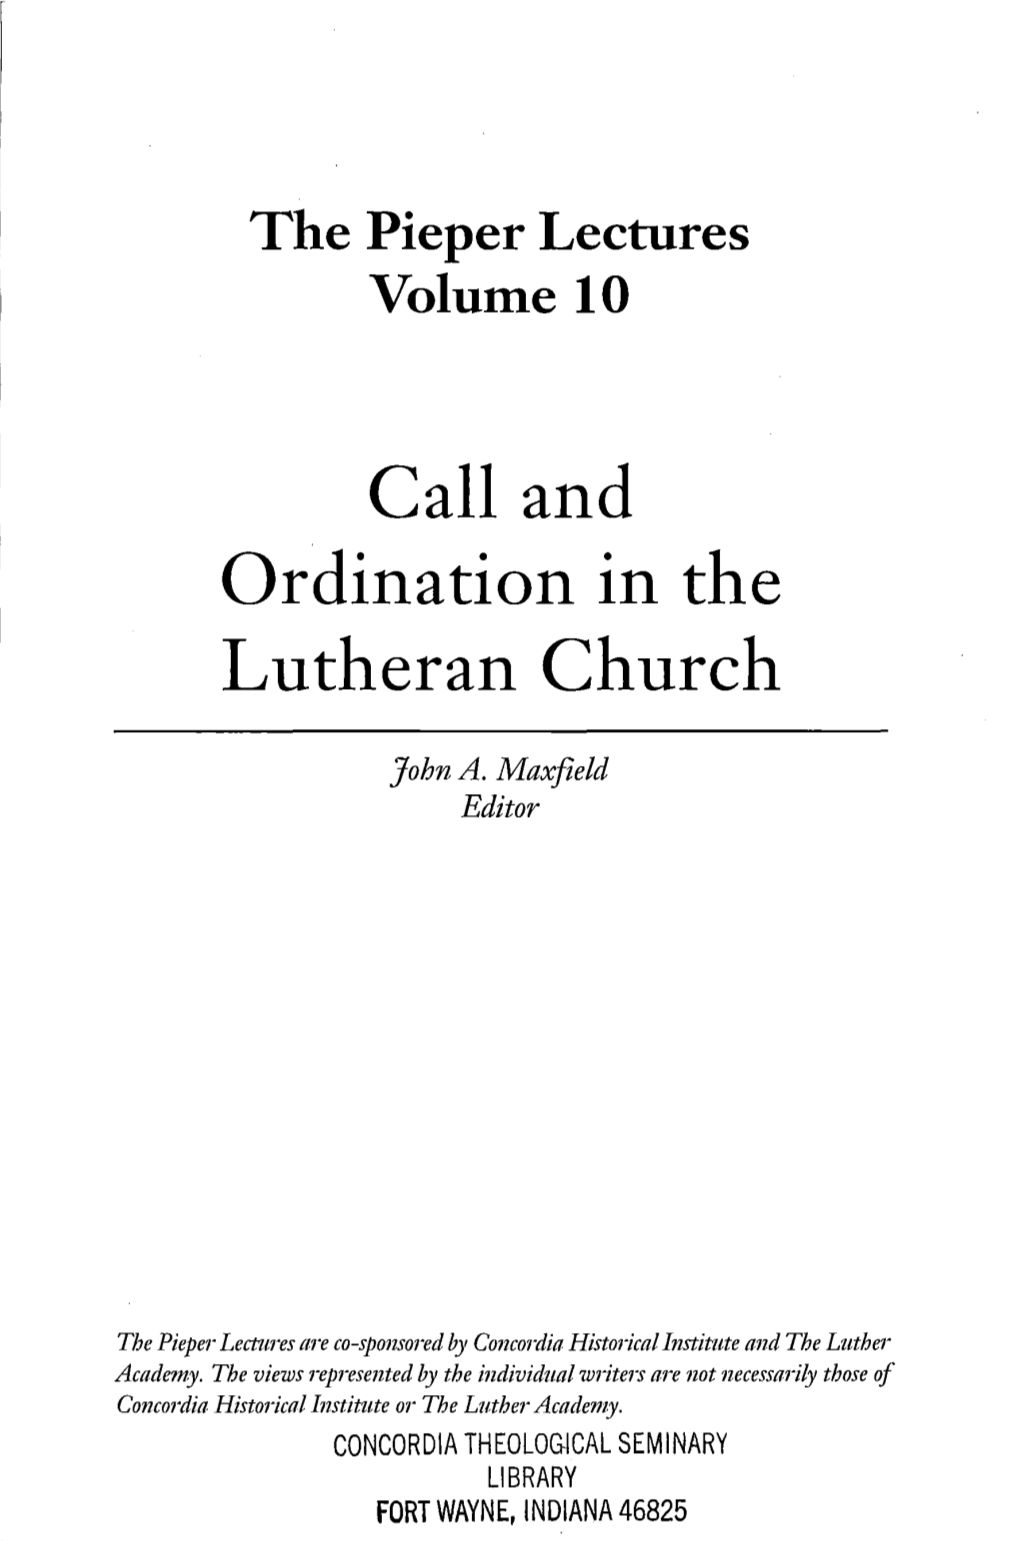 Call and Ordination in the Lutheran Church